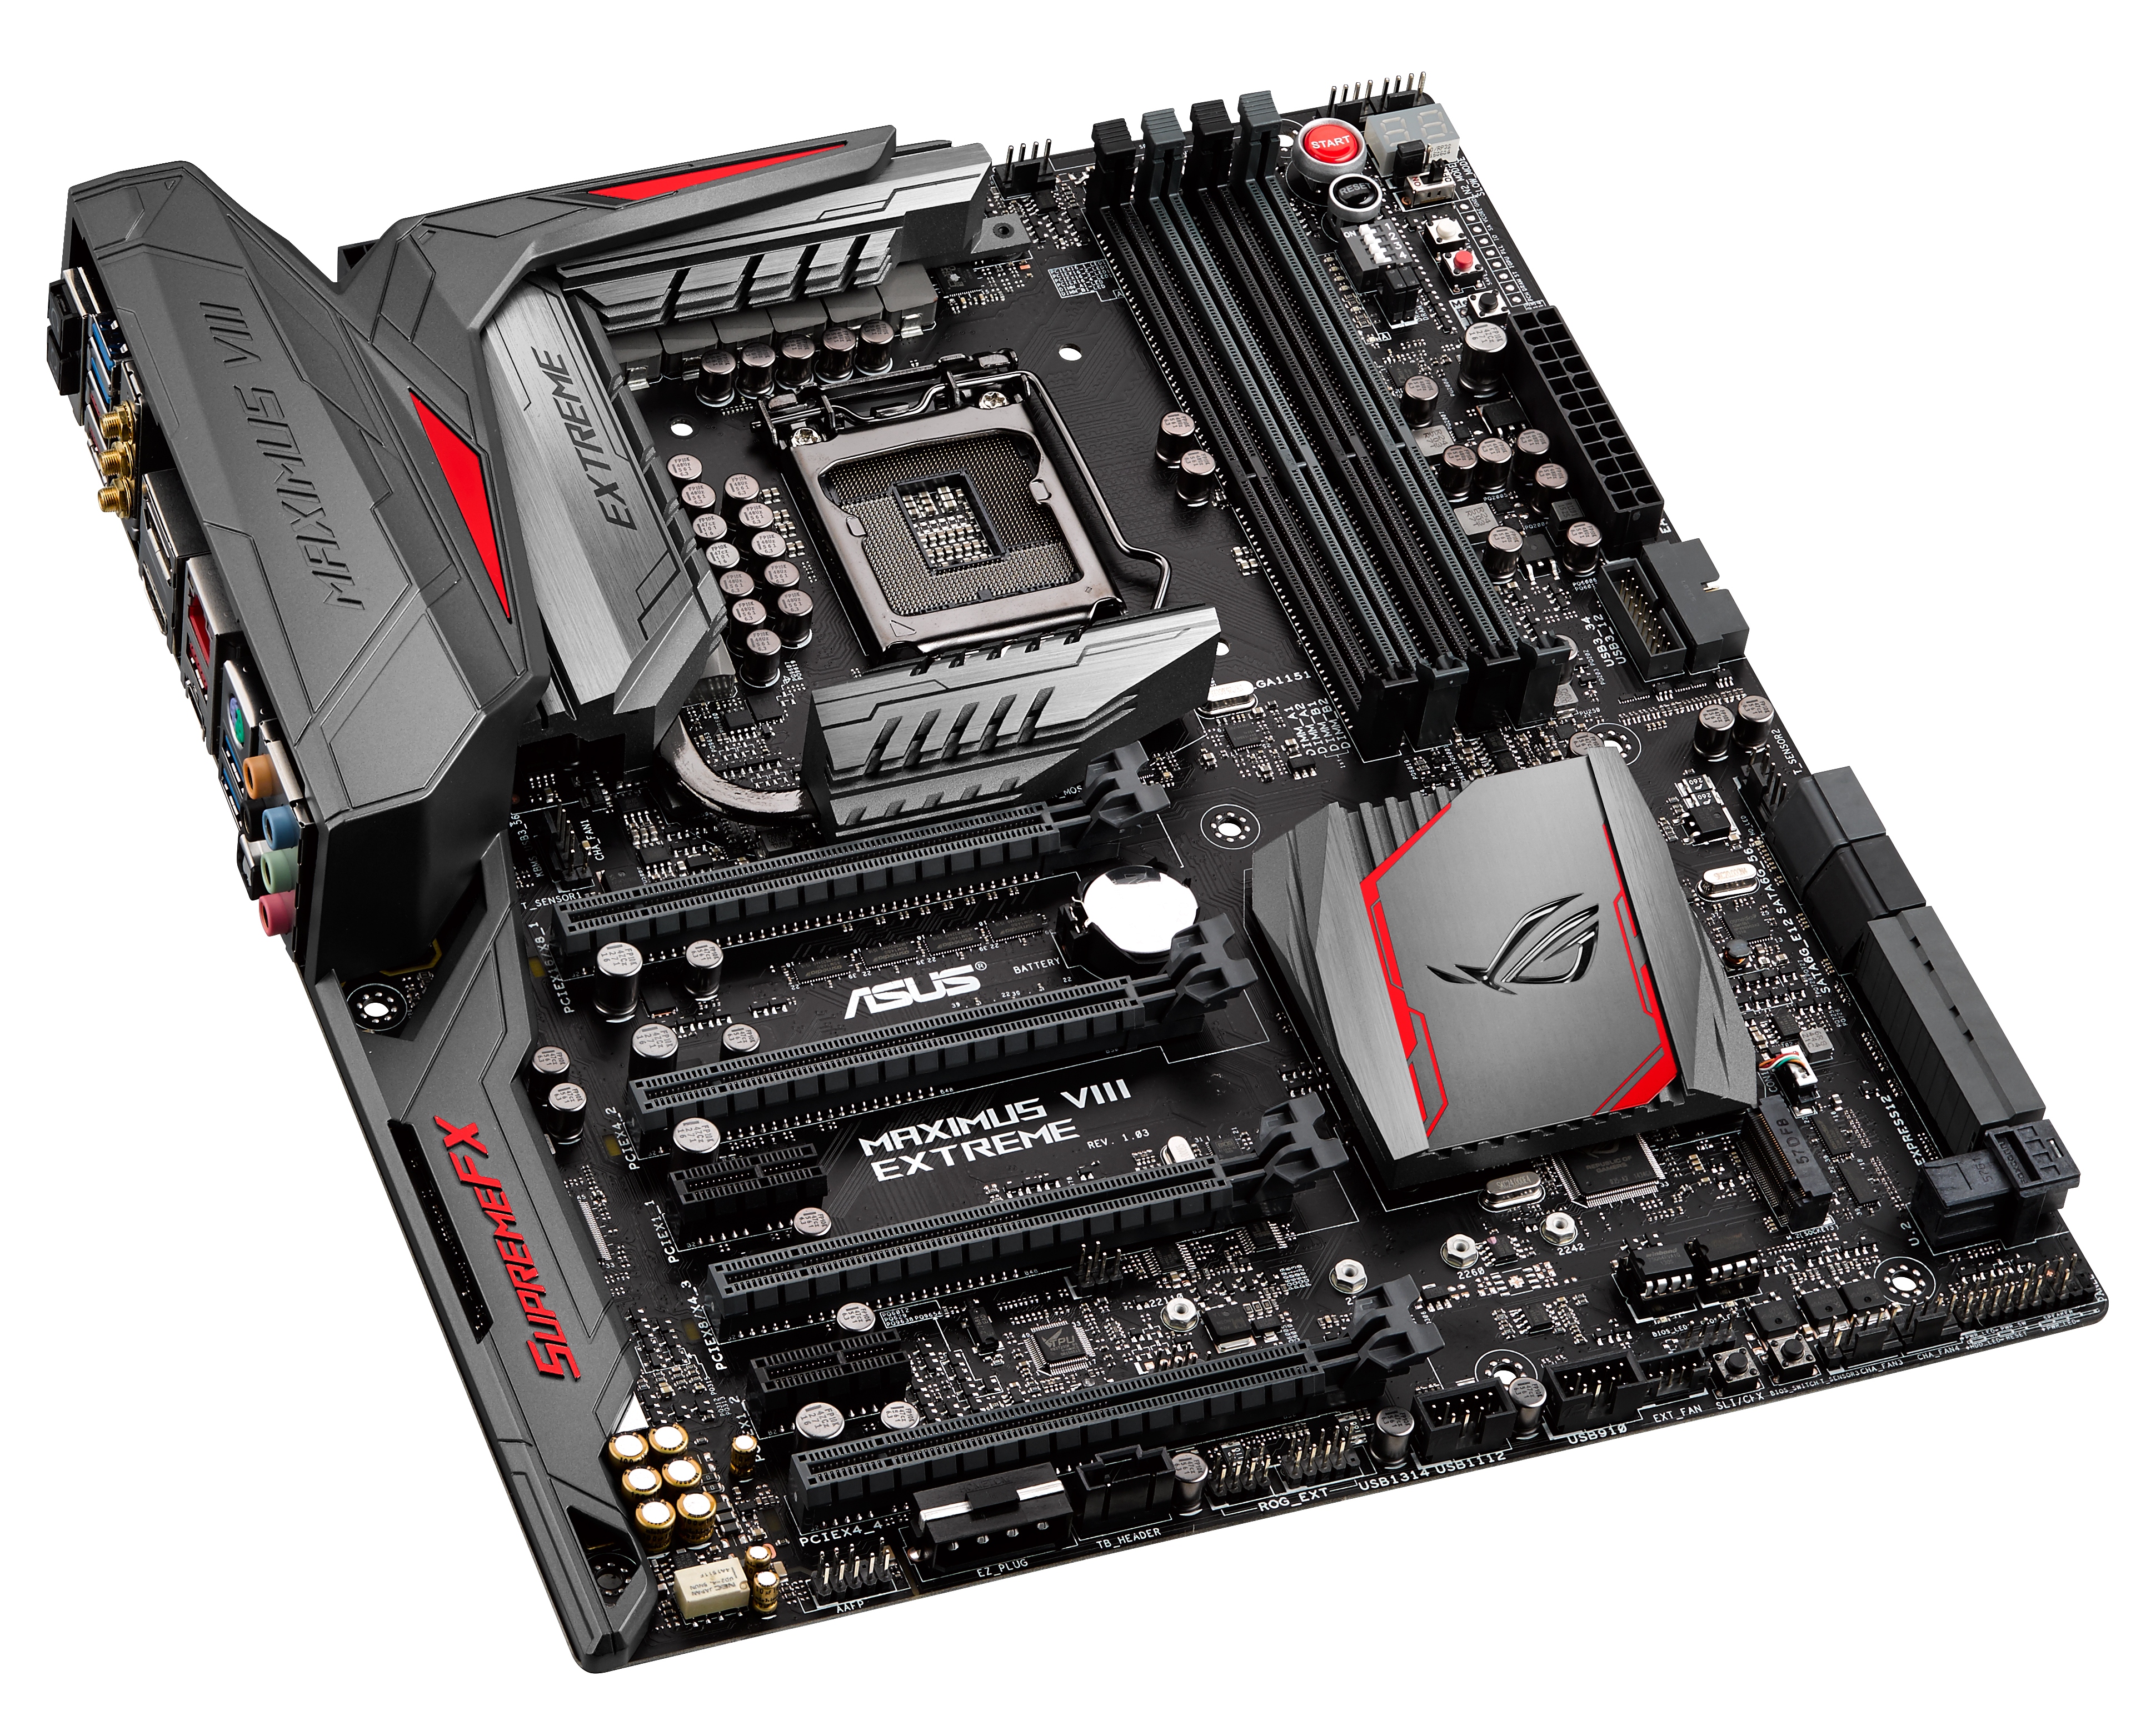 Visual Inspection and Test Setup - The ASUS Maximus VIII Extreme Review: $500 Option